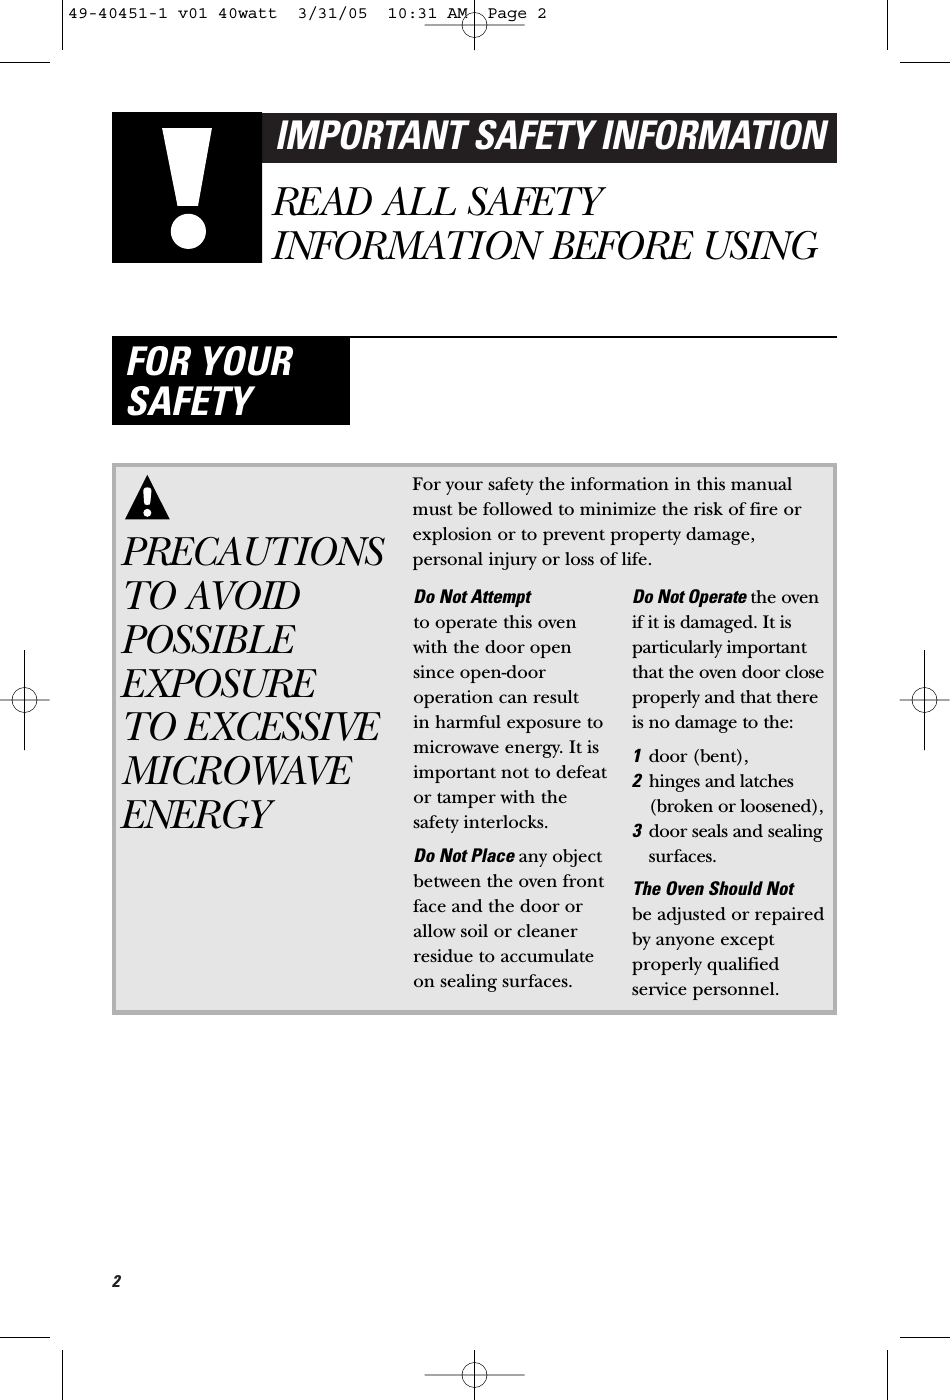 2IMPORTANT SAFETY INFORMATIONREAD ALL SAFETYINFORMATION BEFORE USINGFOR YOURSAFETYPRECAUTIONSTO AVOIDPOSSIBLEEXPOSURE TO EXCESSIVEMICROWAVEENERGYFor your safety the information in this manualmust be followed to minimize the risk of fire orexplosion or to prevent property damage,personal injury or loss of life.Do Not Attempt to operate this ovenwith the door opensince open-dooroperation can result in harmful exposure tomicrowave energy. It isimportant not to defeator tamper with thesafety interlocks.Do Not Place any objectbetween the oven frontface and the door orallow soil or cleanerresidue to accumulateon sealing surfaces.Do Not Operate the oven if it is damaged. It isparticularly importantthat the oven door closeproperly and that thereis no damage to the:1door (bent), 2hinges and latches(broken or loosened),3door seals and sealingsurfaces.The Oven Should Not be adjusted or repairedby anyone exceptproperly qualifiedservice personnel.49-40451-1 v01 40watt  3/31/05  10:31 AM  Page 2